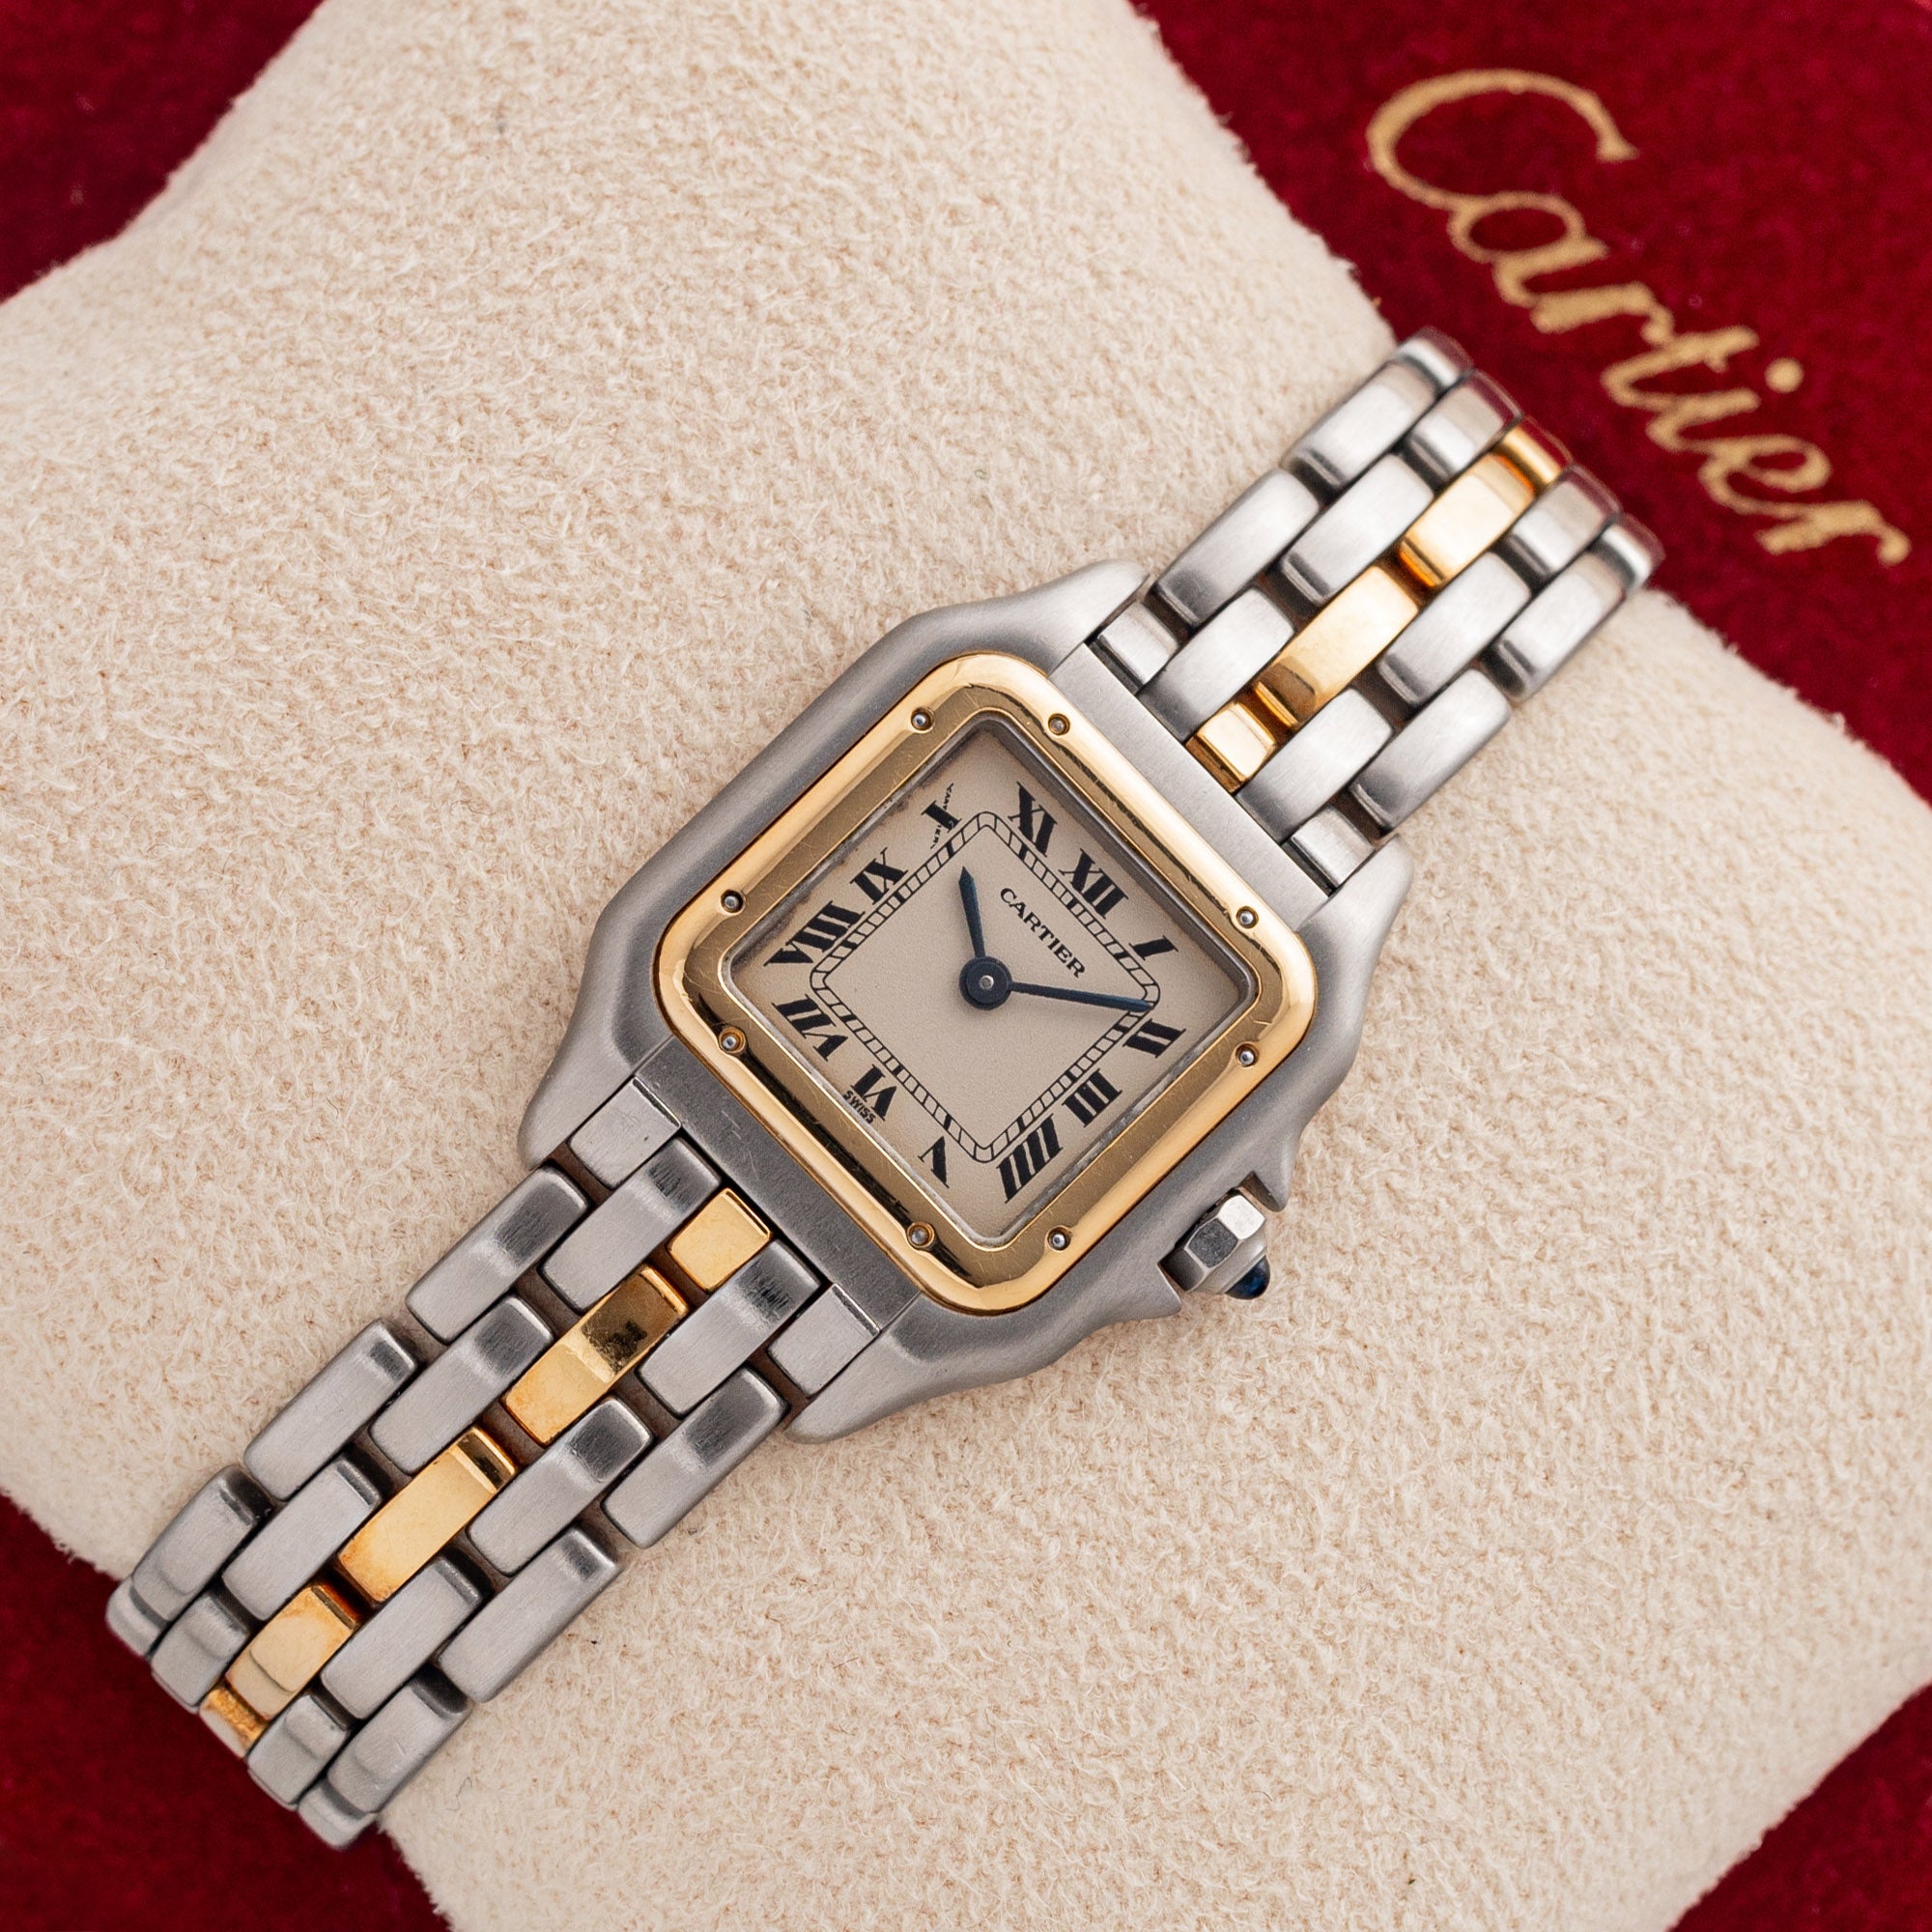 Cartier Panthère 1120 - Two Tone "Small"